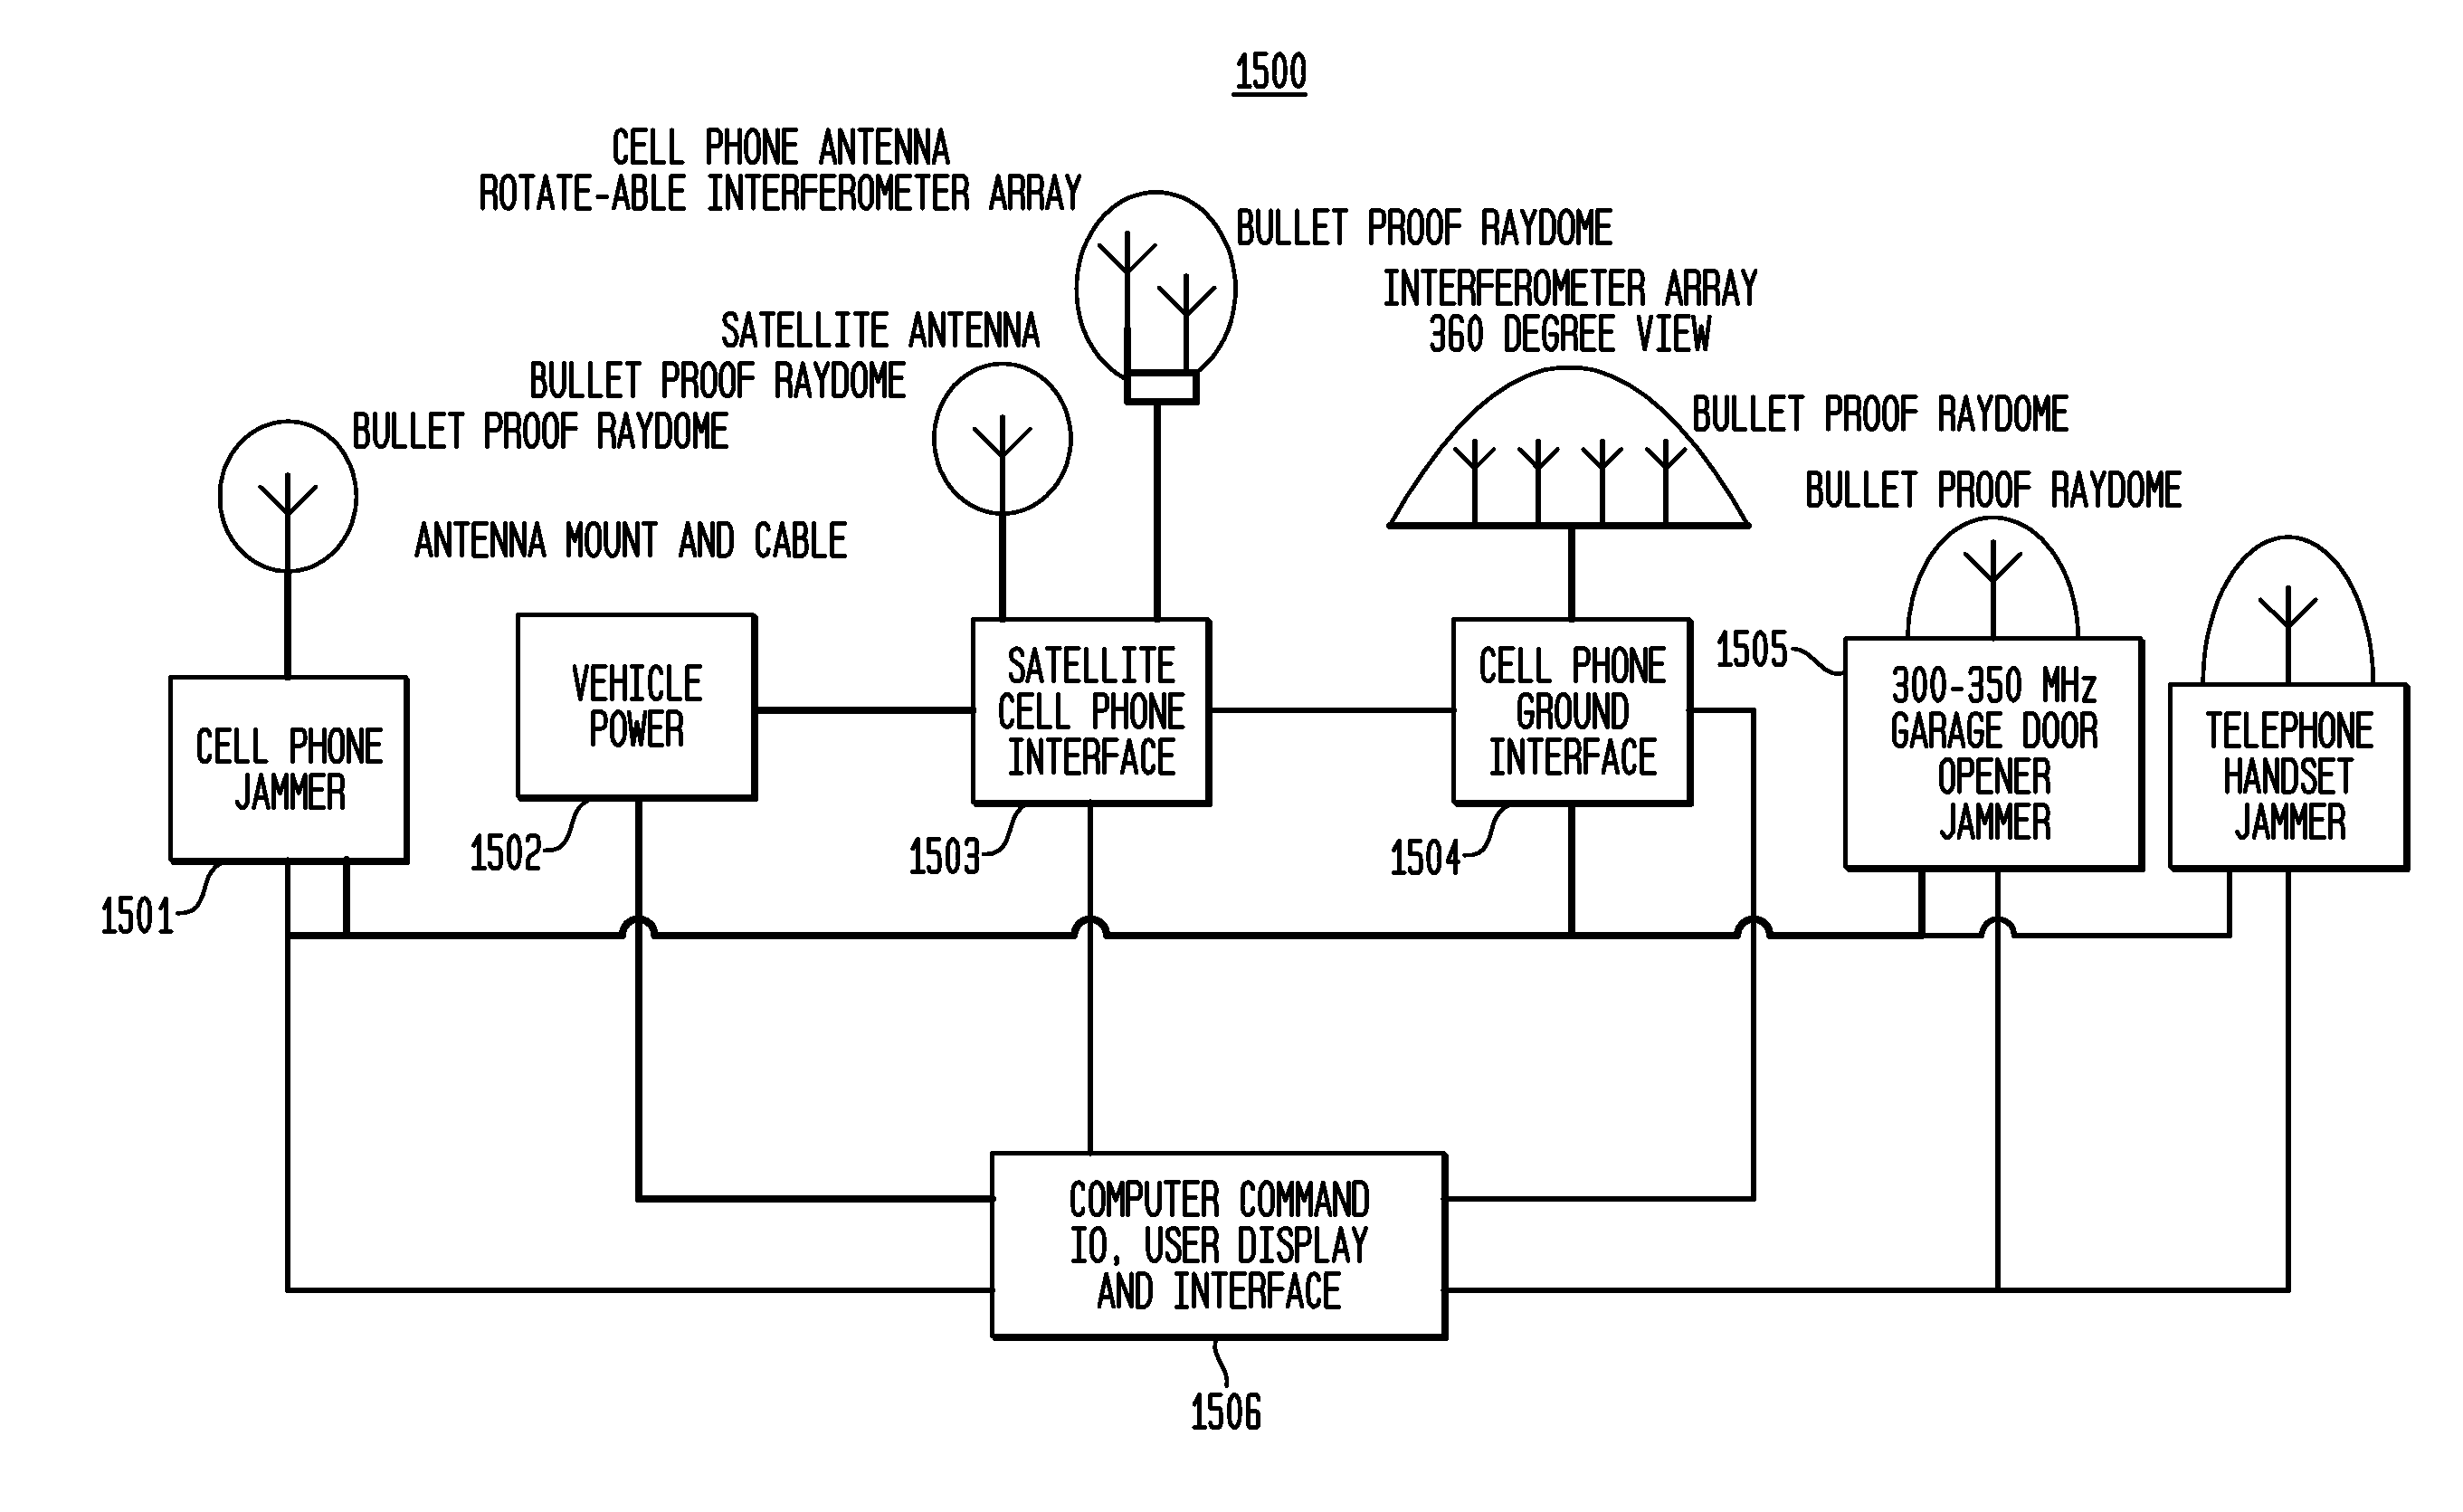 Systems and Methods for Detecting and Controlling Transmission Devices